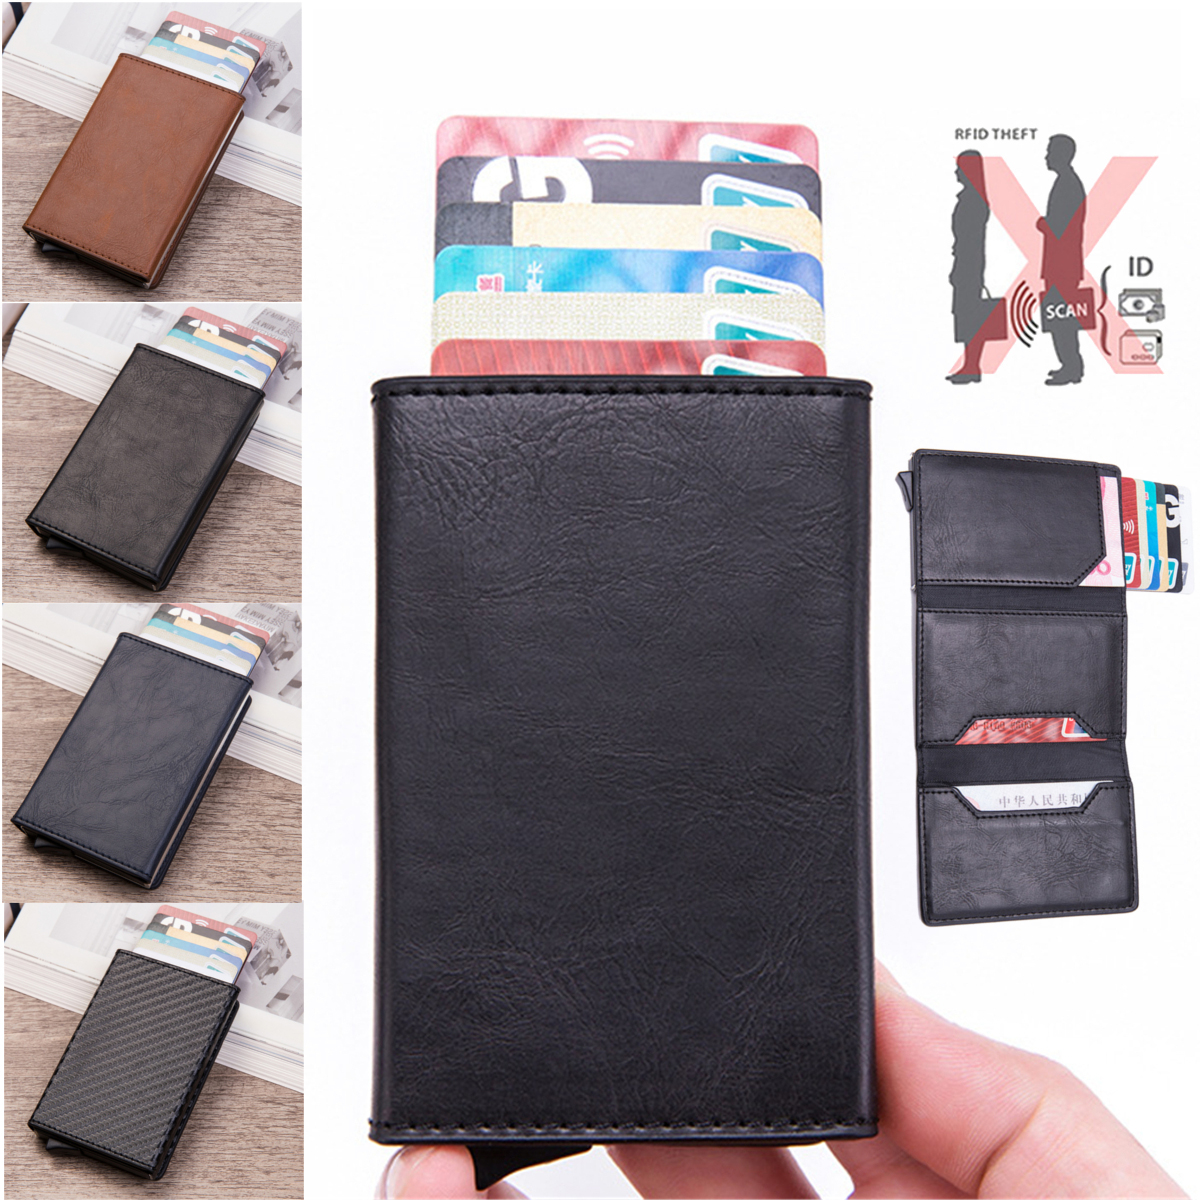 

Men Leather Wallet Travel RFID Blocking Purse ID Credit Card Holder Coin Pockets